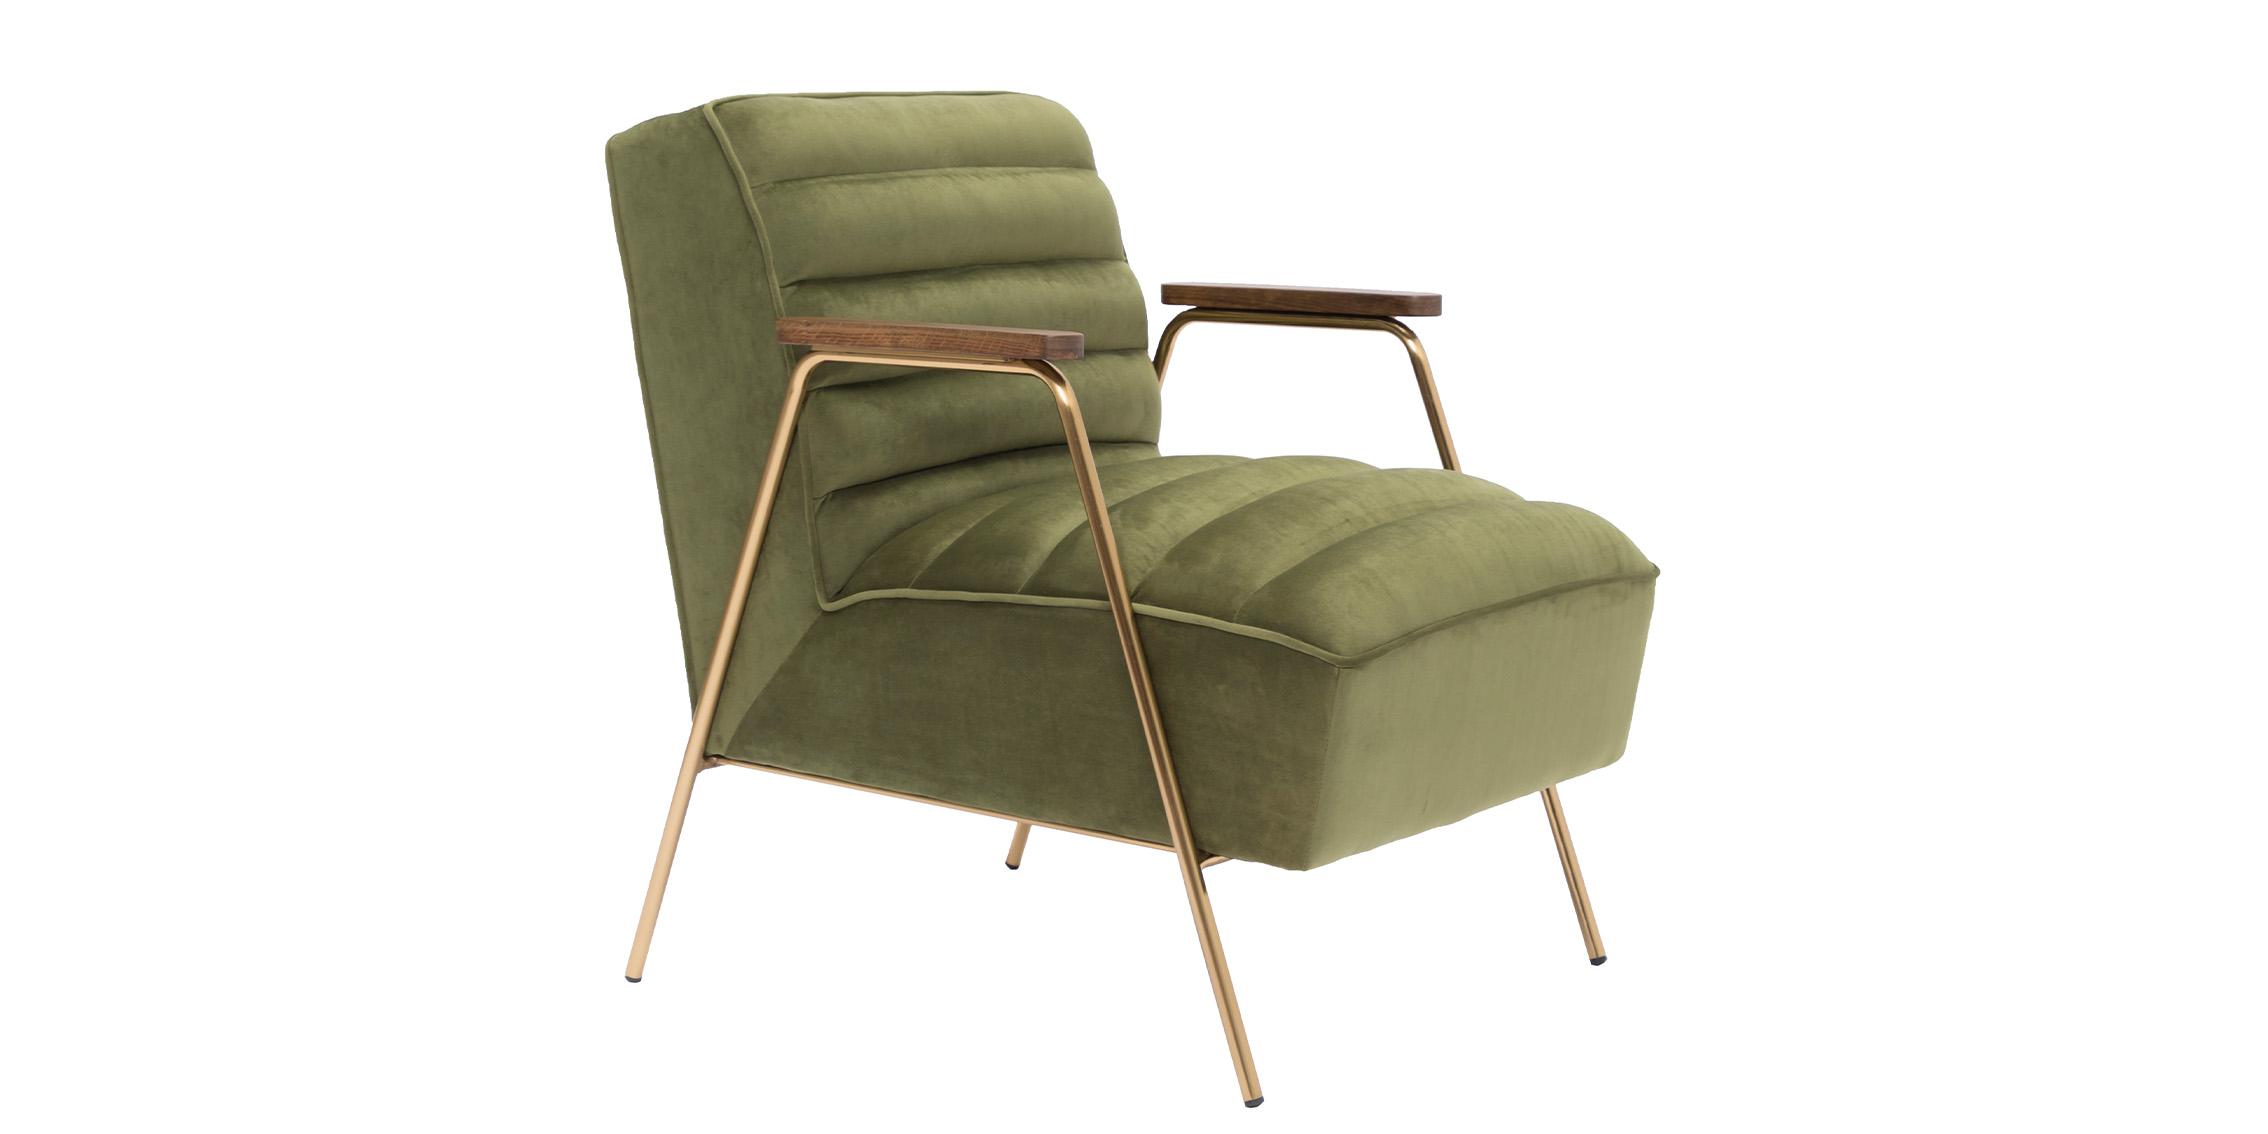 Contemporary, Modern Accent Chair WOODFORD 521Olive 521Olive in Olive, Gold Fabric